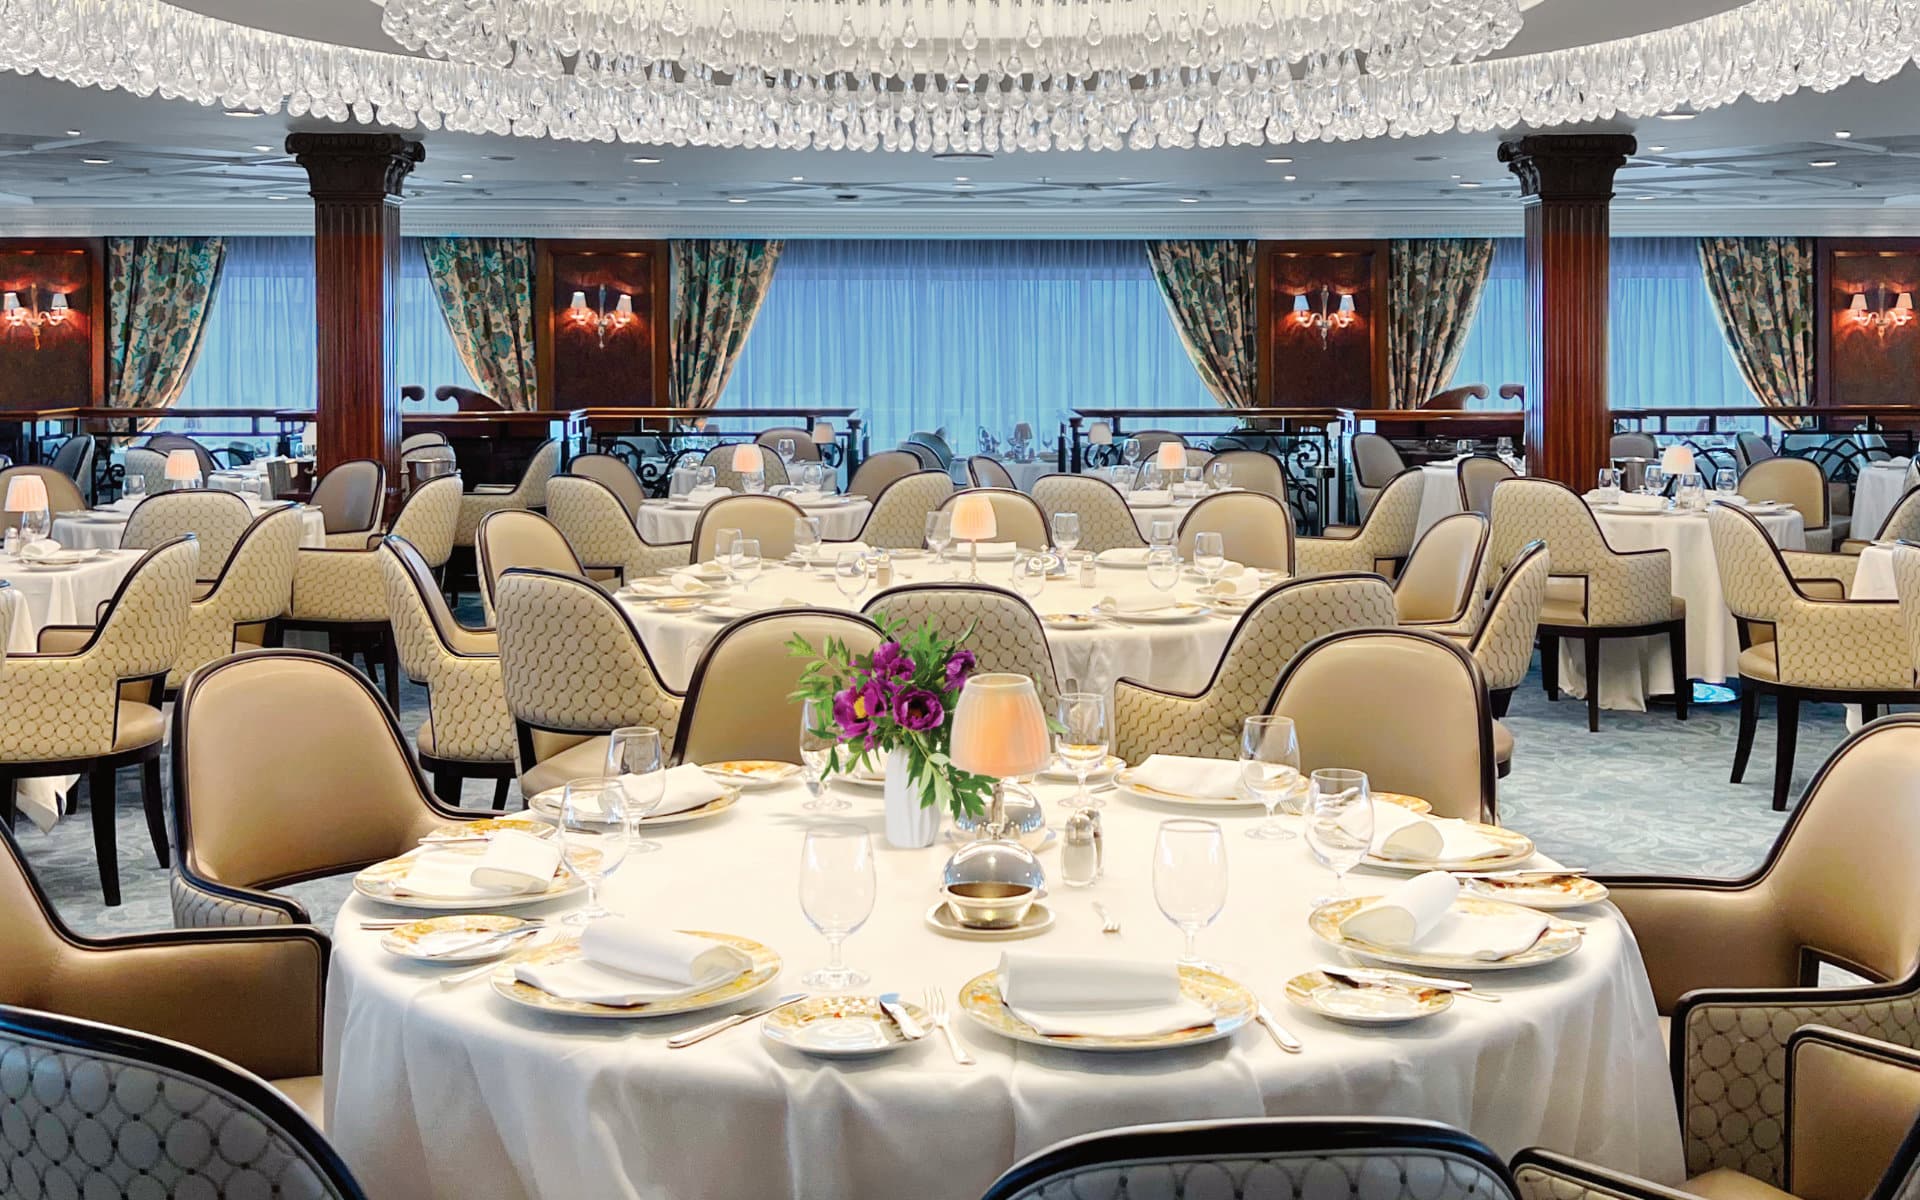 The Grand Dining Room is one of the Oceania Nautica restaurants.